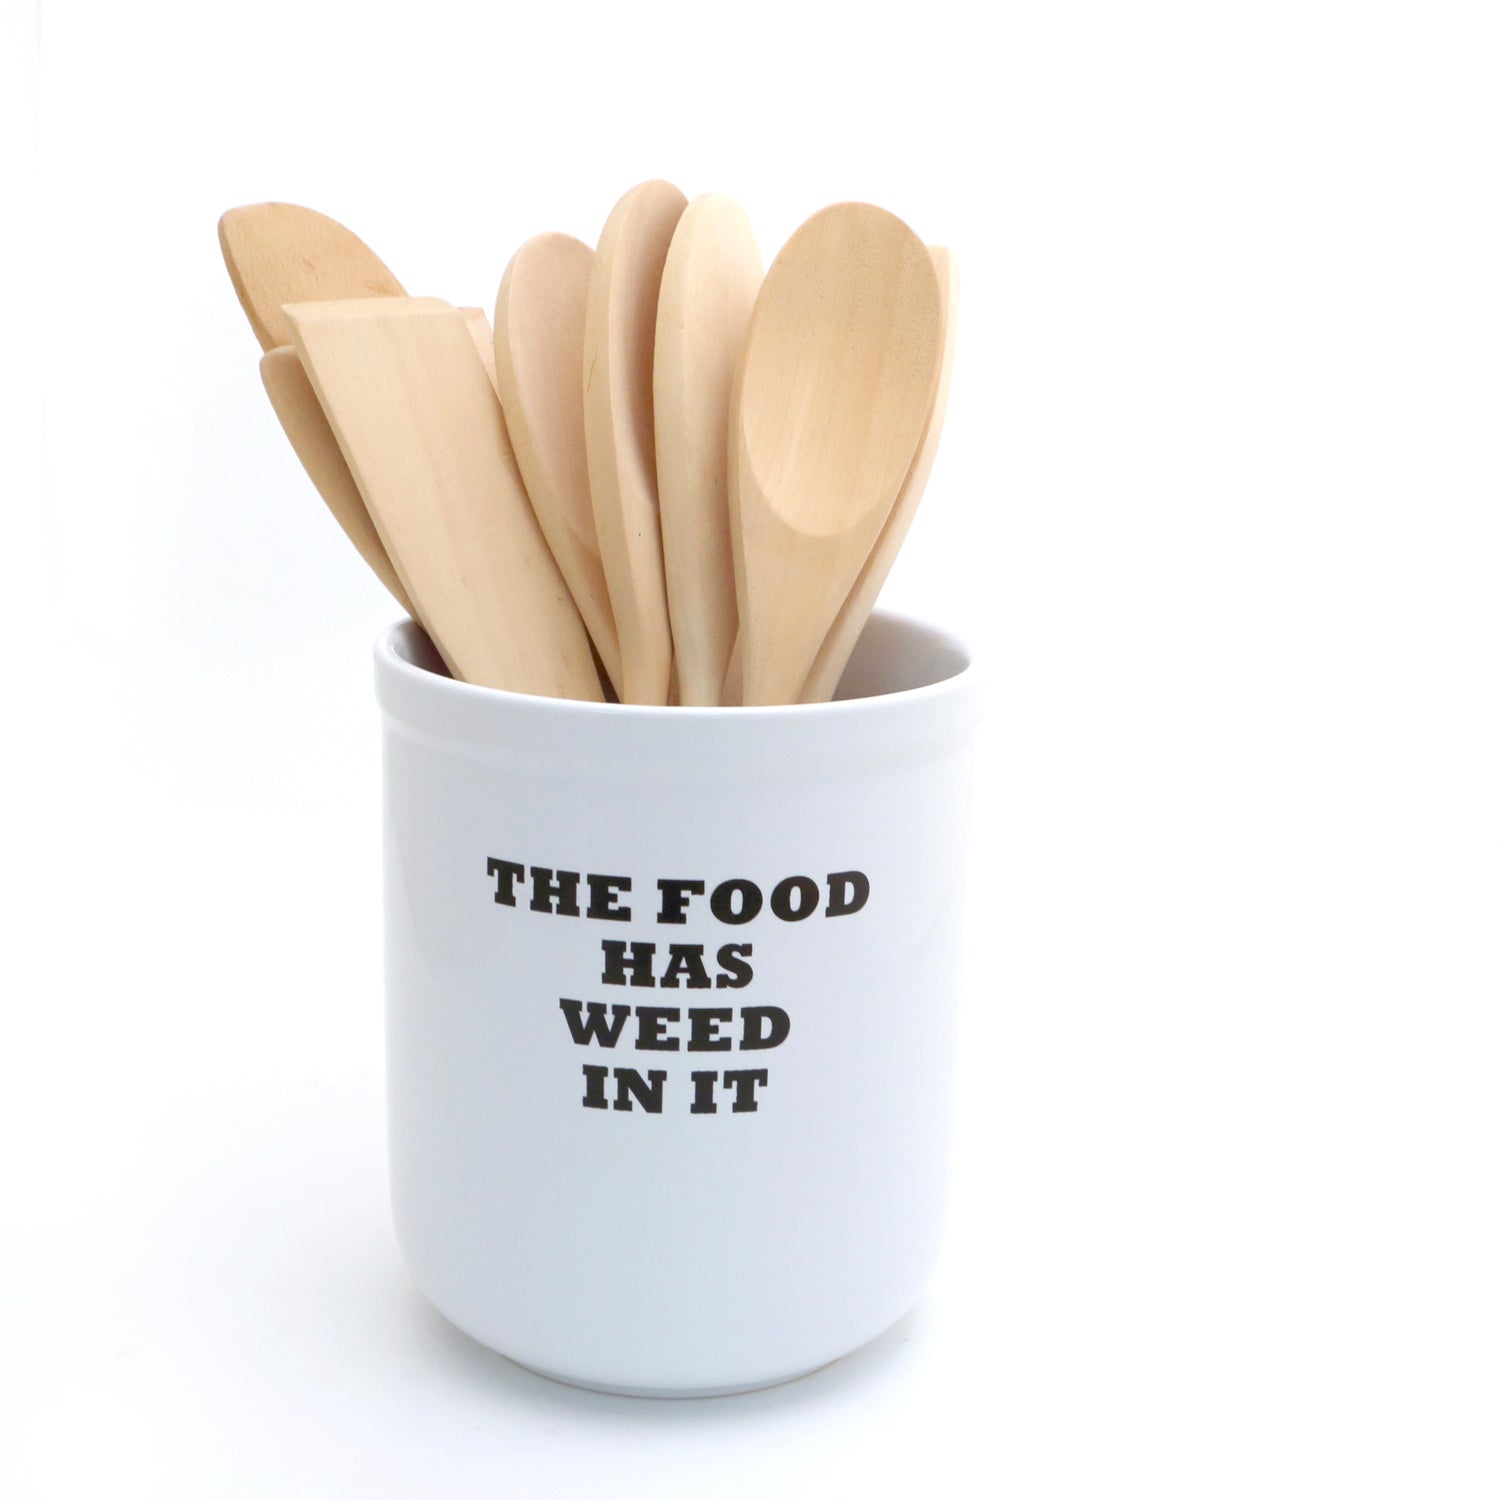 The Food Has Weed in It, Utensil Holder, Crock, funny kitchen decor –  LennyMud